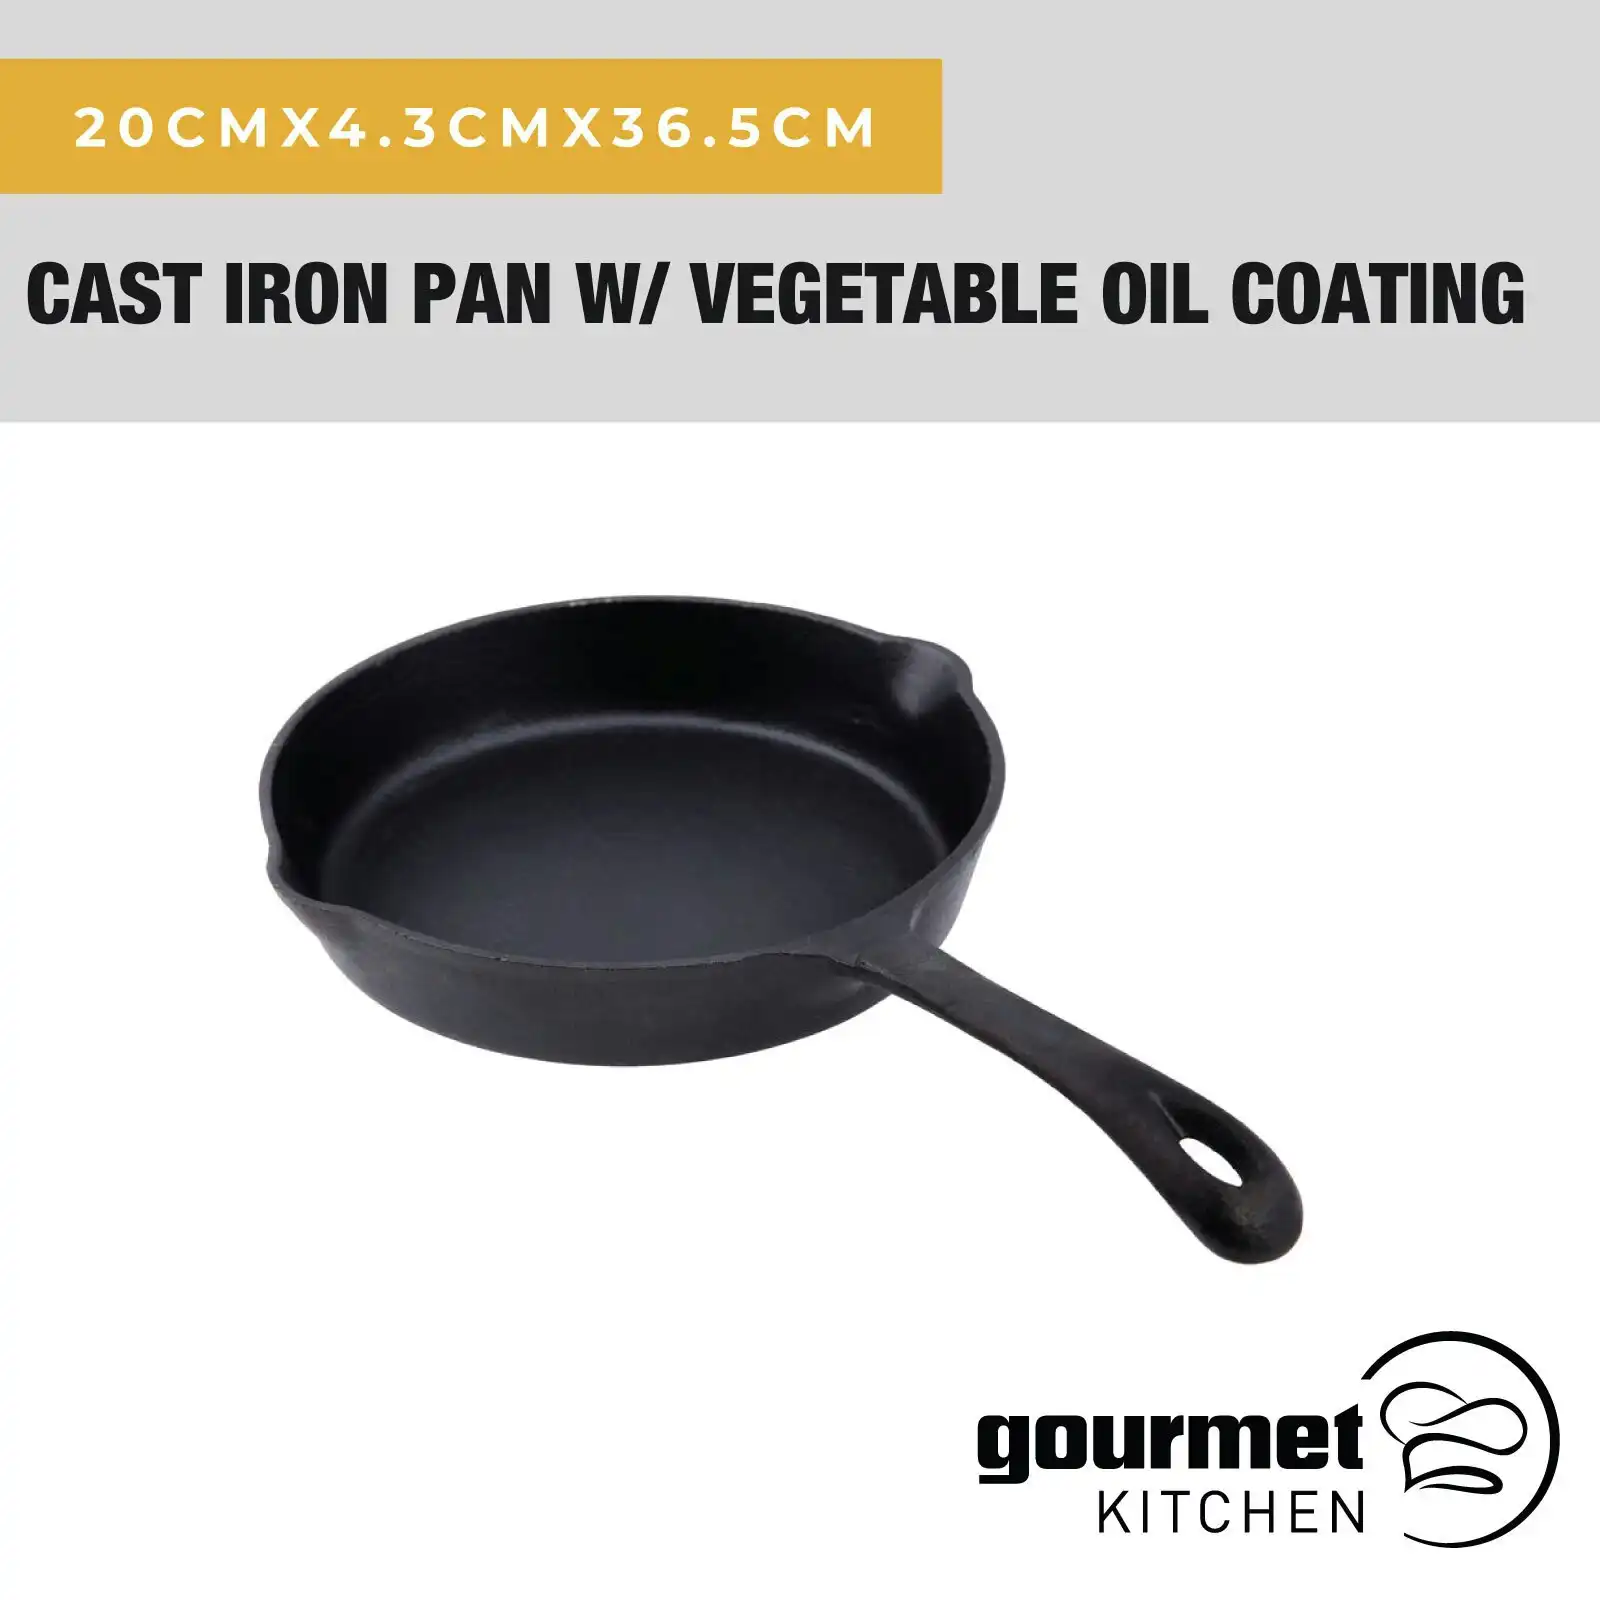 Gourmet Kitchen 20cm Cast Iron Pan with Vegetable Oil Coating  Cast Iron Skillet